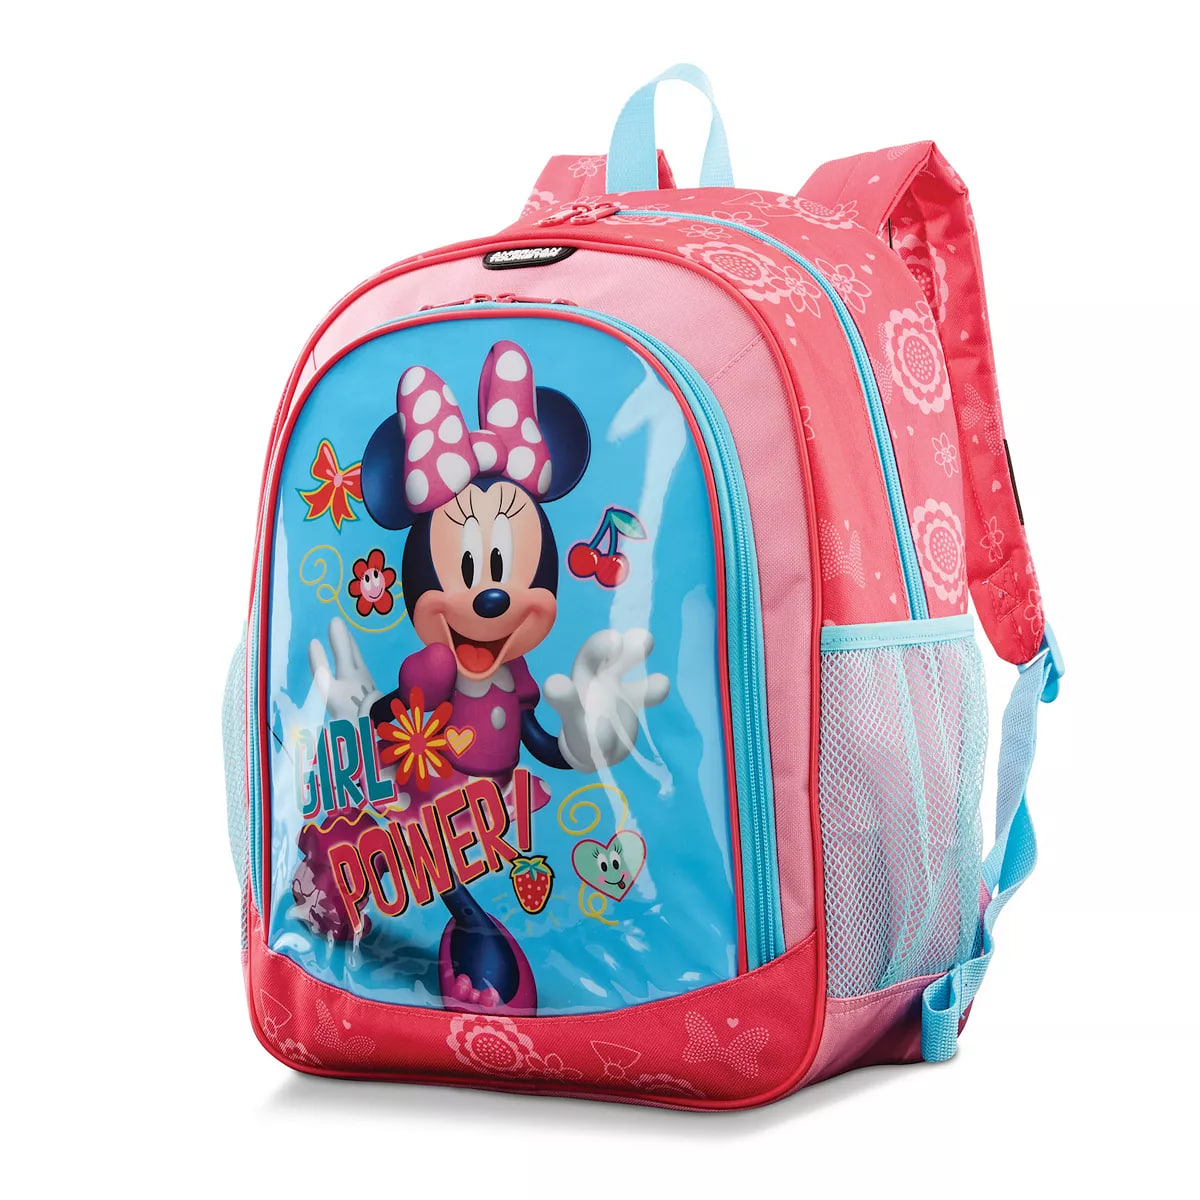 American Tourister Disney’s Minnie Mouse Backpack NOW $41.99 (was $69.99) Thumbnail